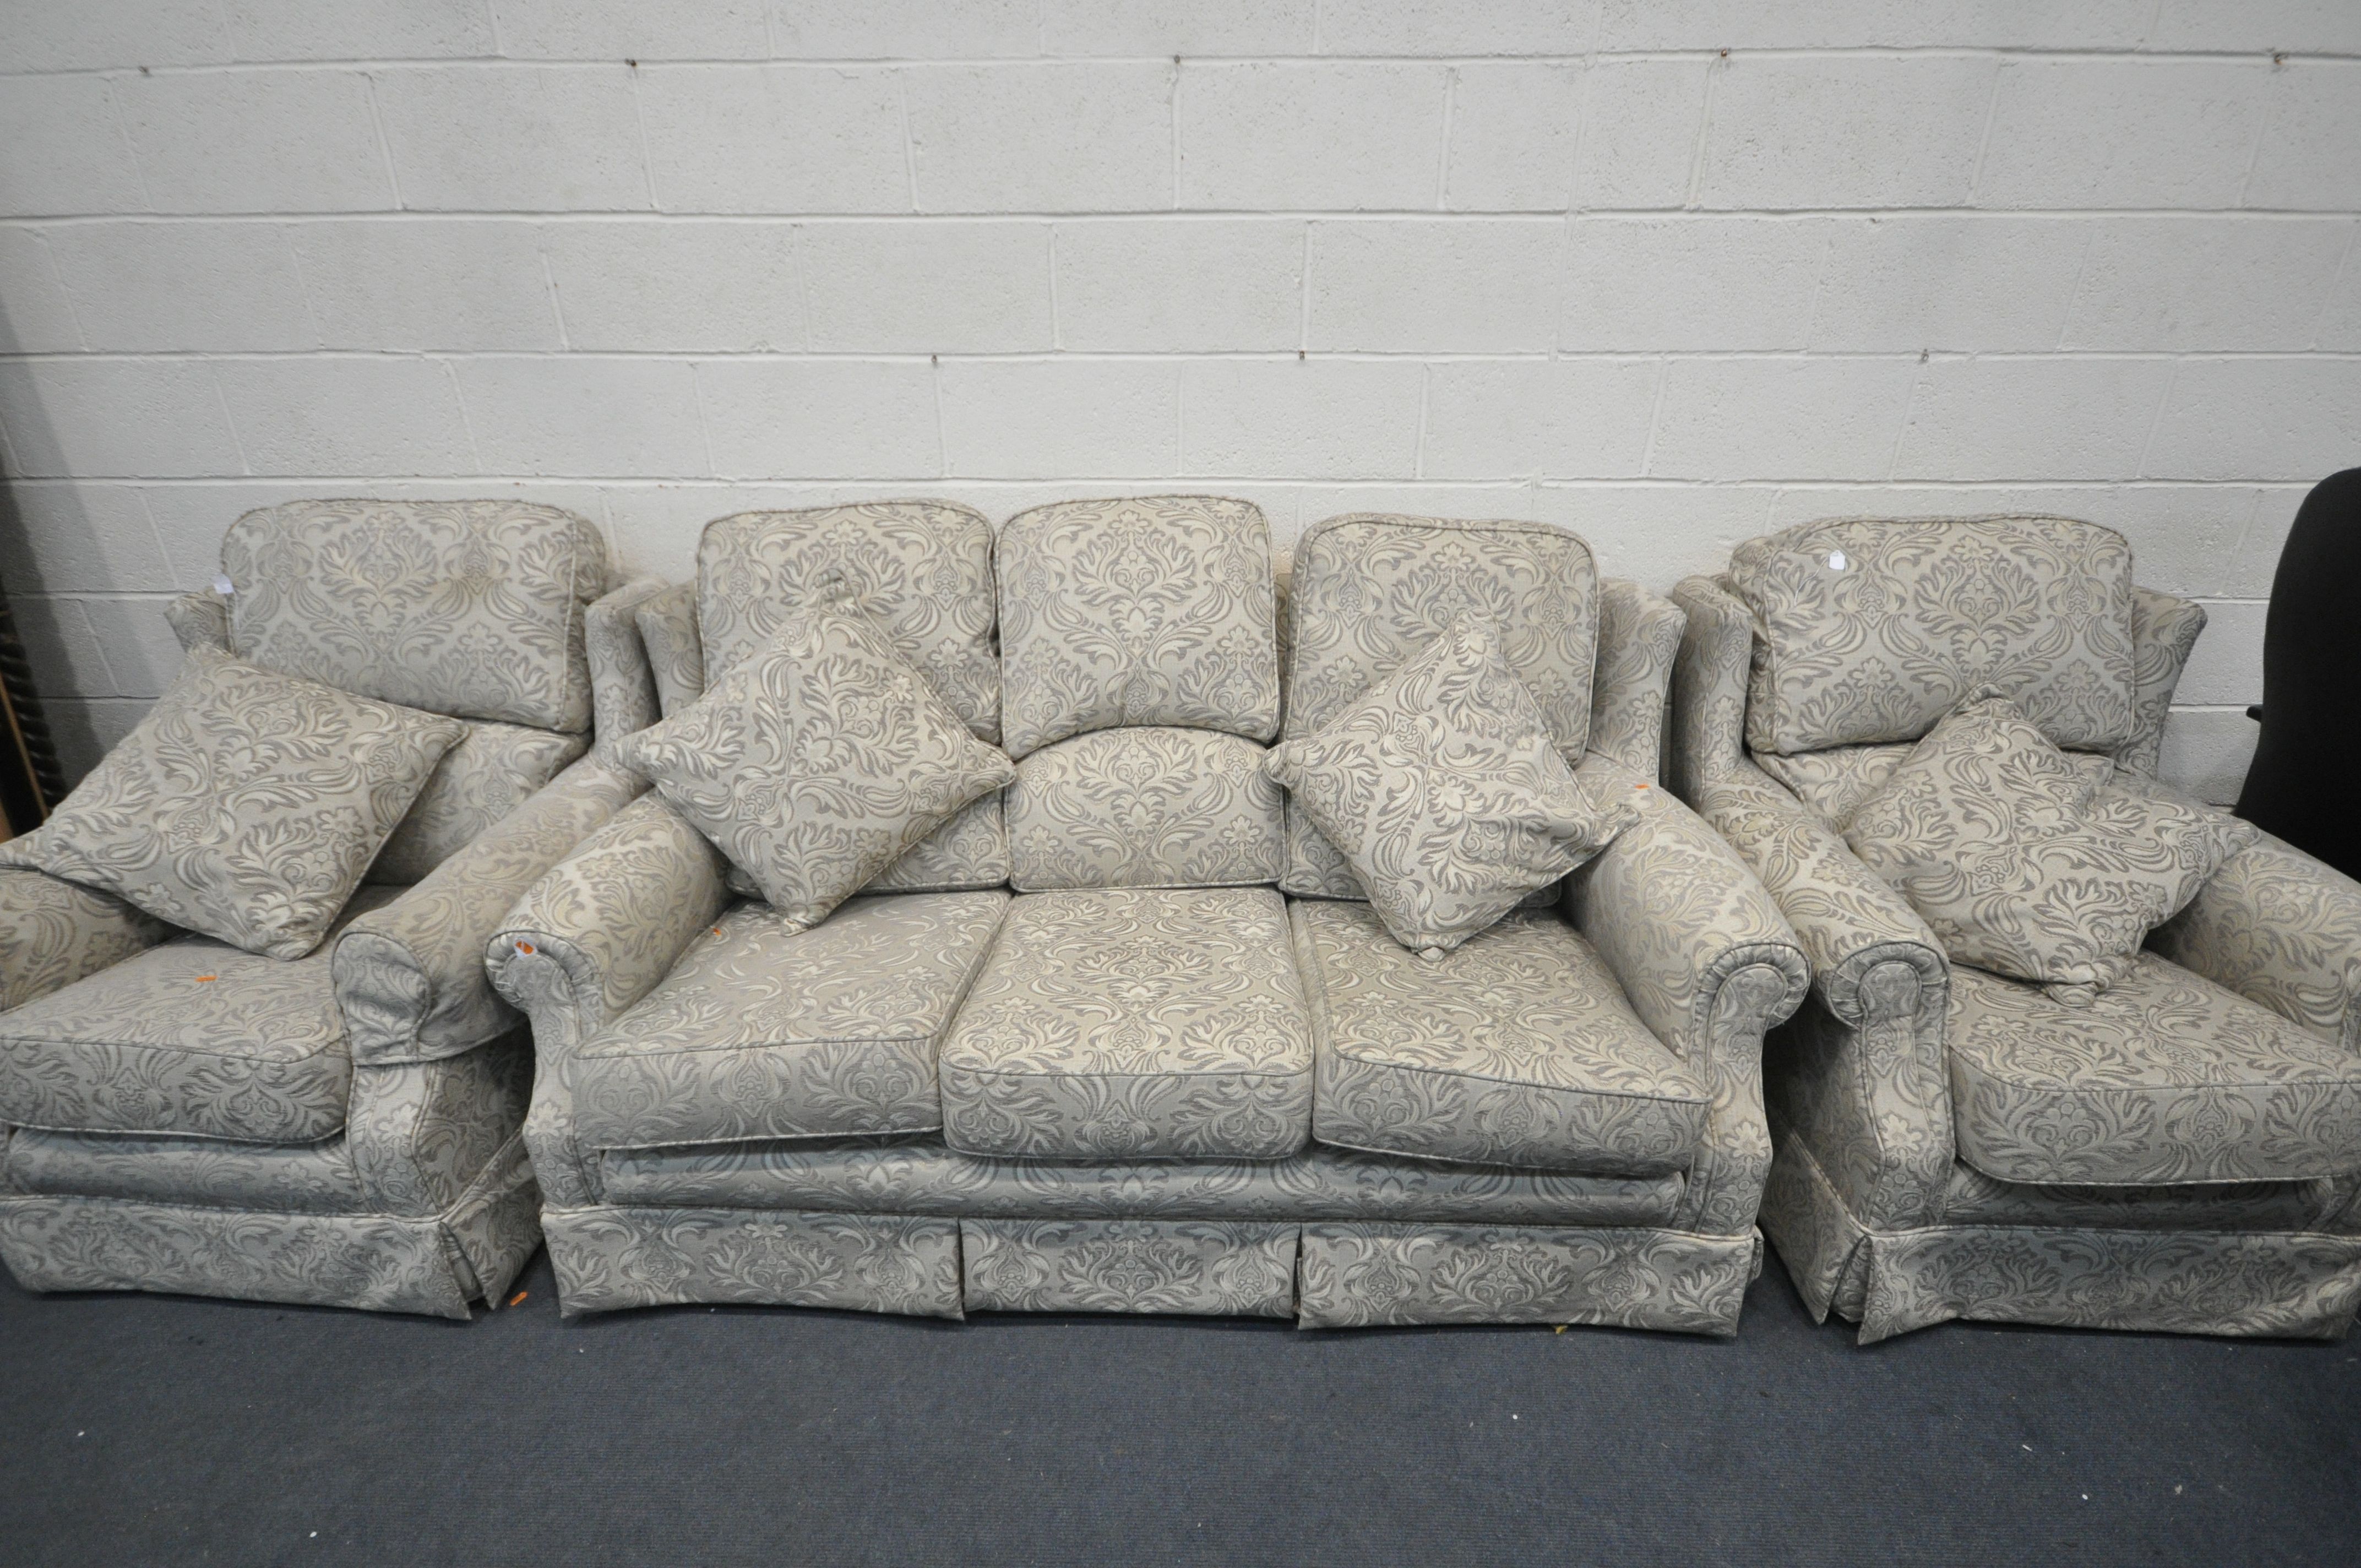 A FLORAL UPHOLSTERED THREE PIECE LOUNGE SUITE, comprising a three seater settee, and a pair of